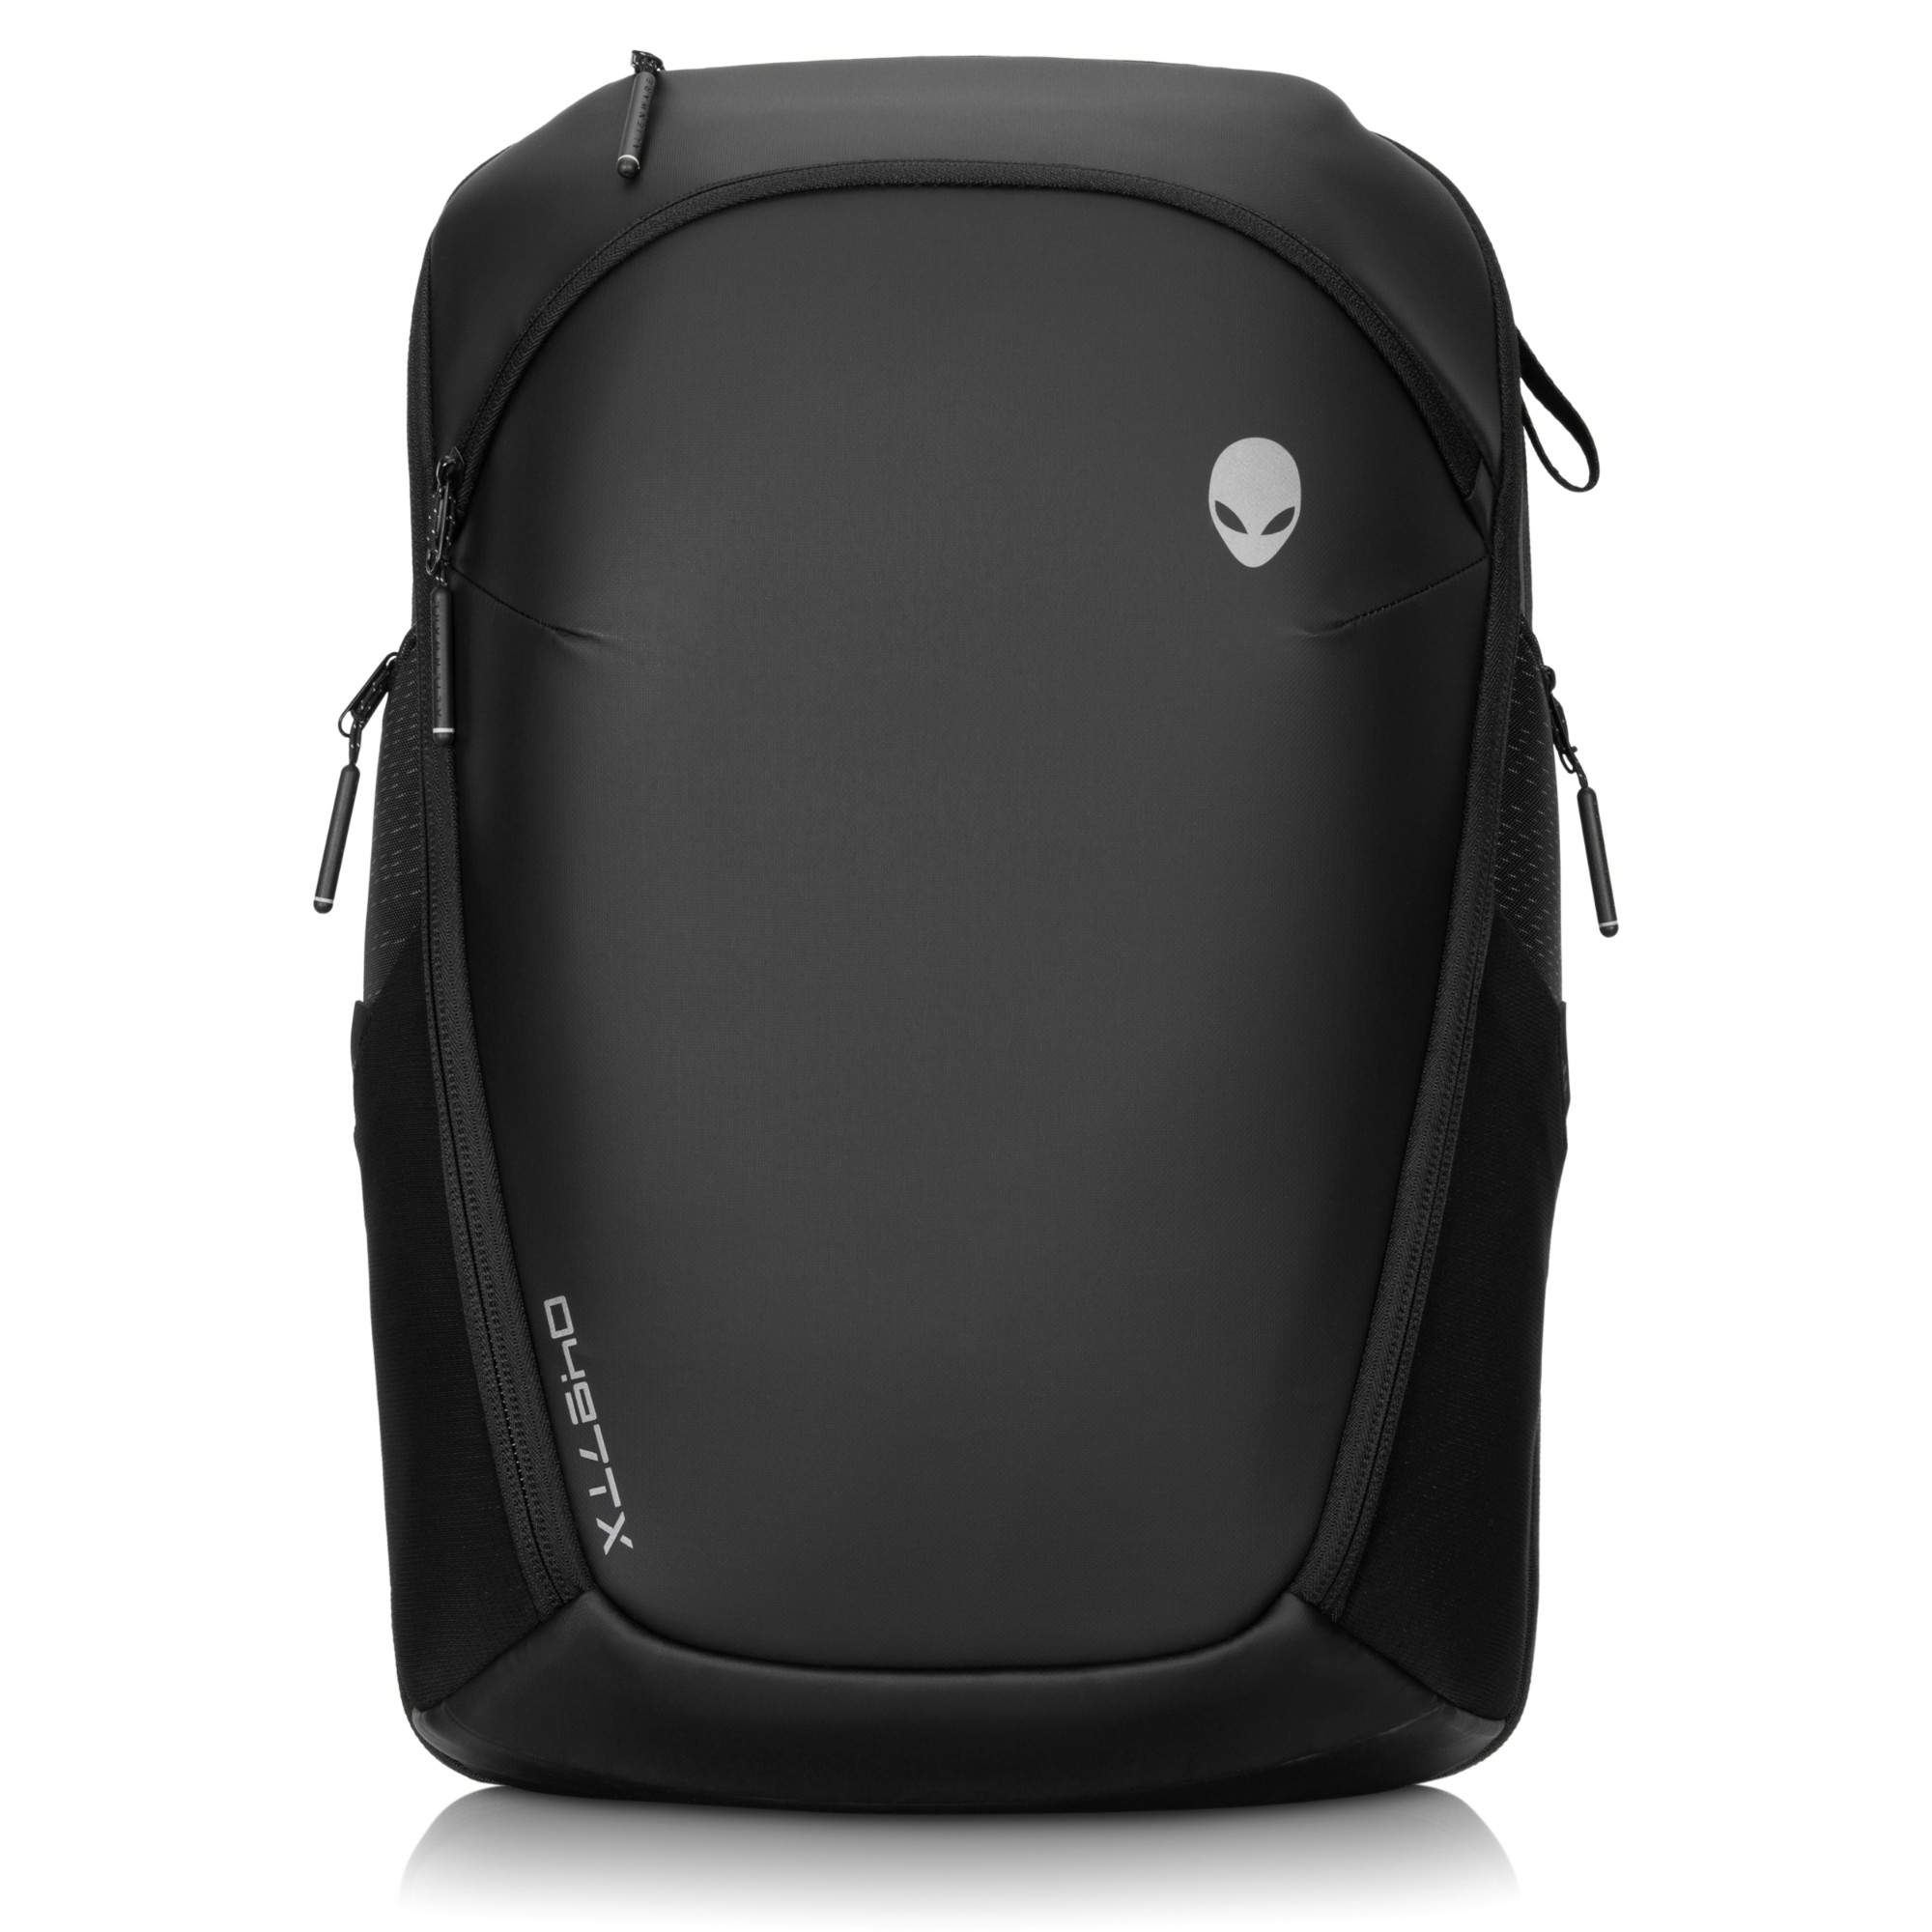 Photos - Backpack Dell Alienware AW724P 45.7 cm   Black AWBP-AW724P-18 (18")